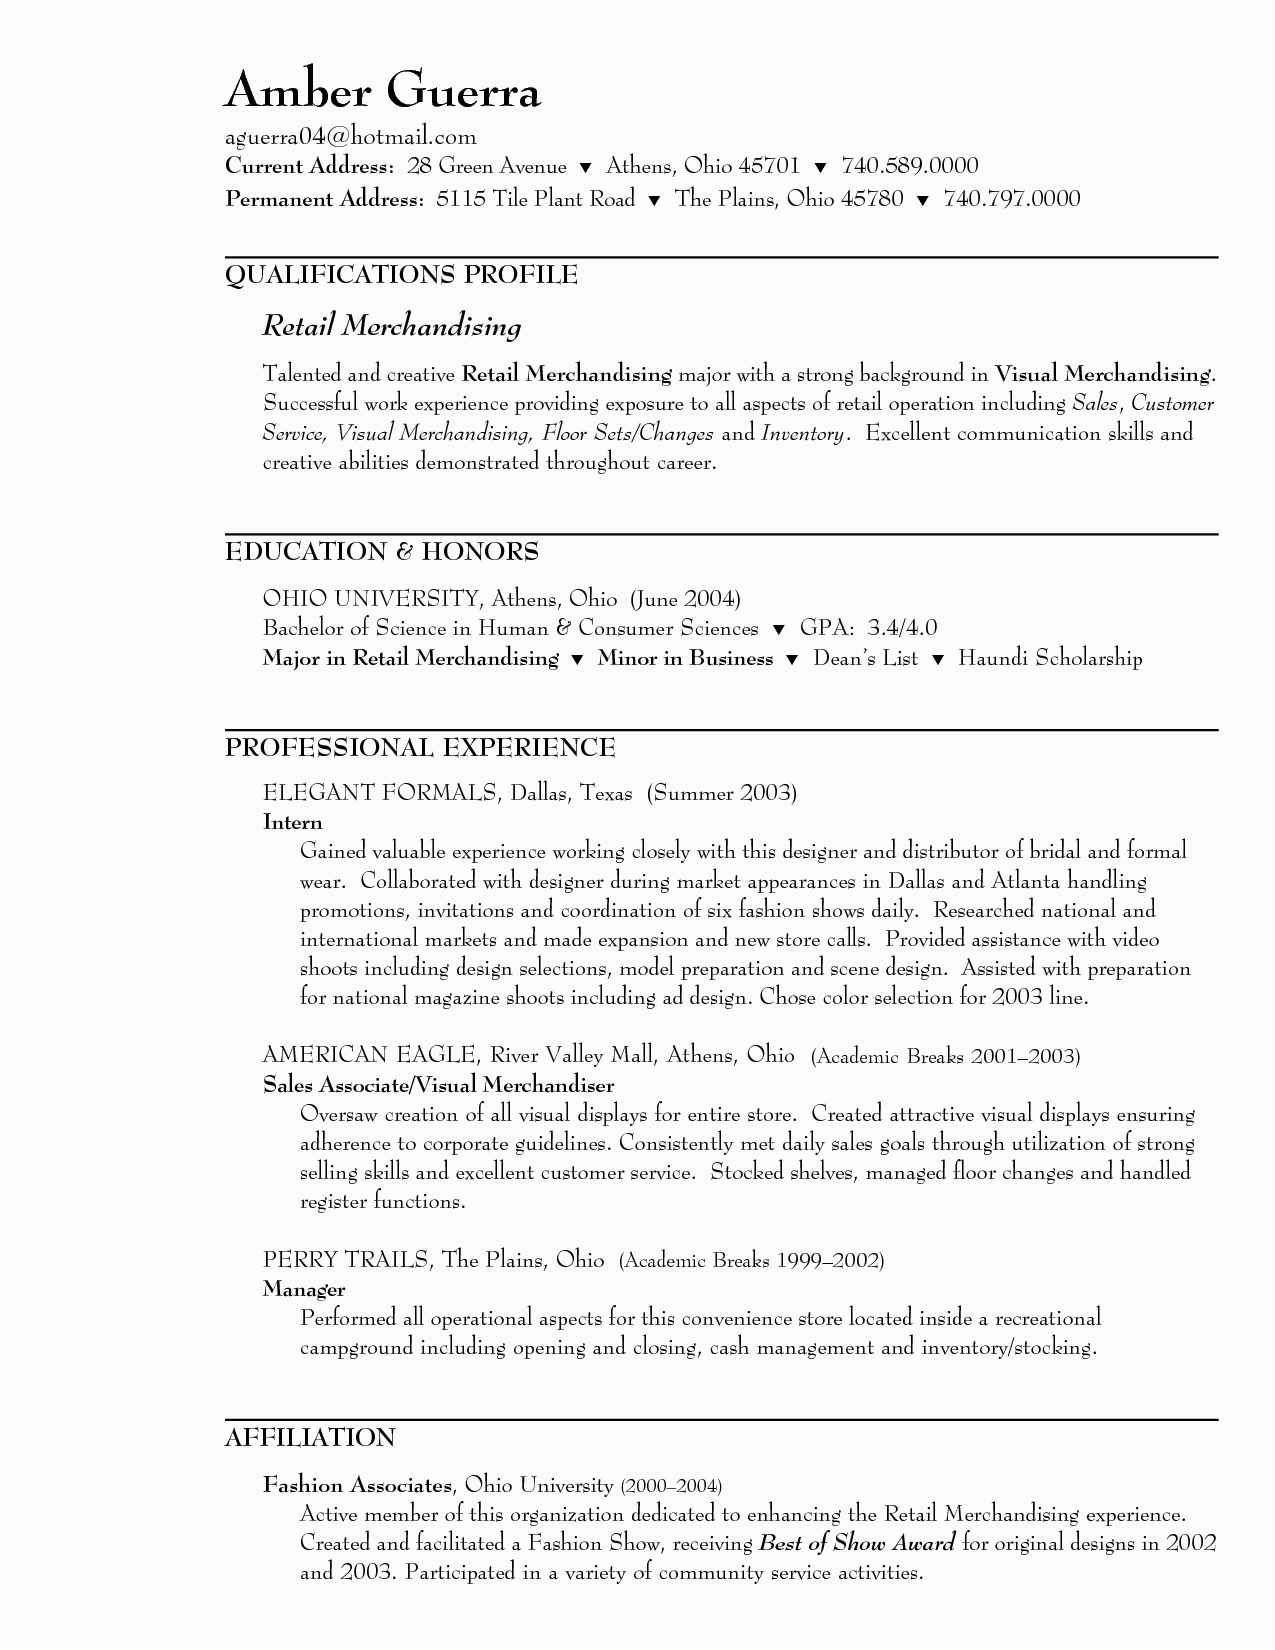 Sample Resume for Clothing Retail Sales associate Sample Resume for Retail Sales associate In A Clothing